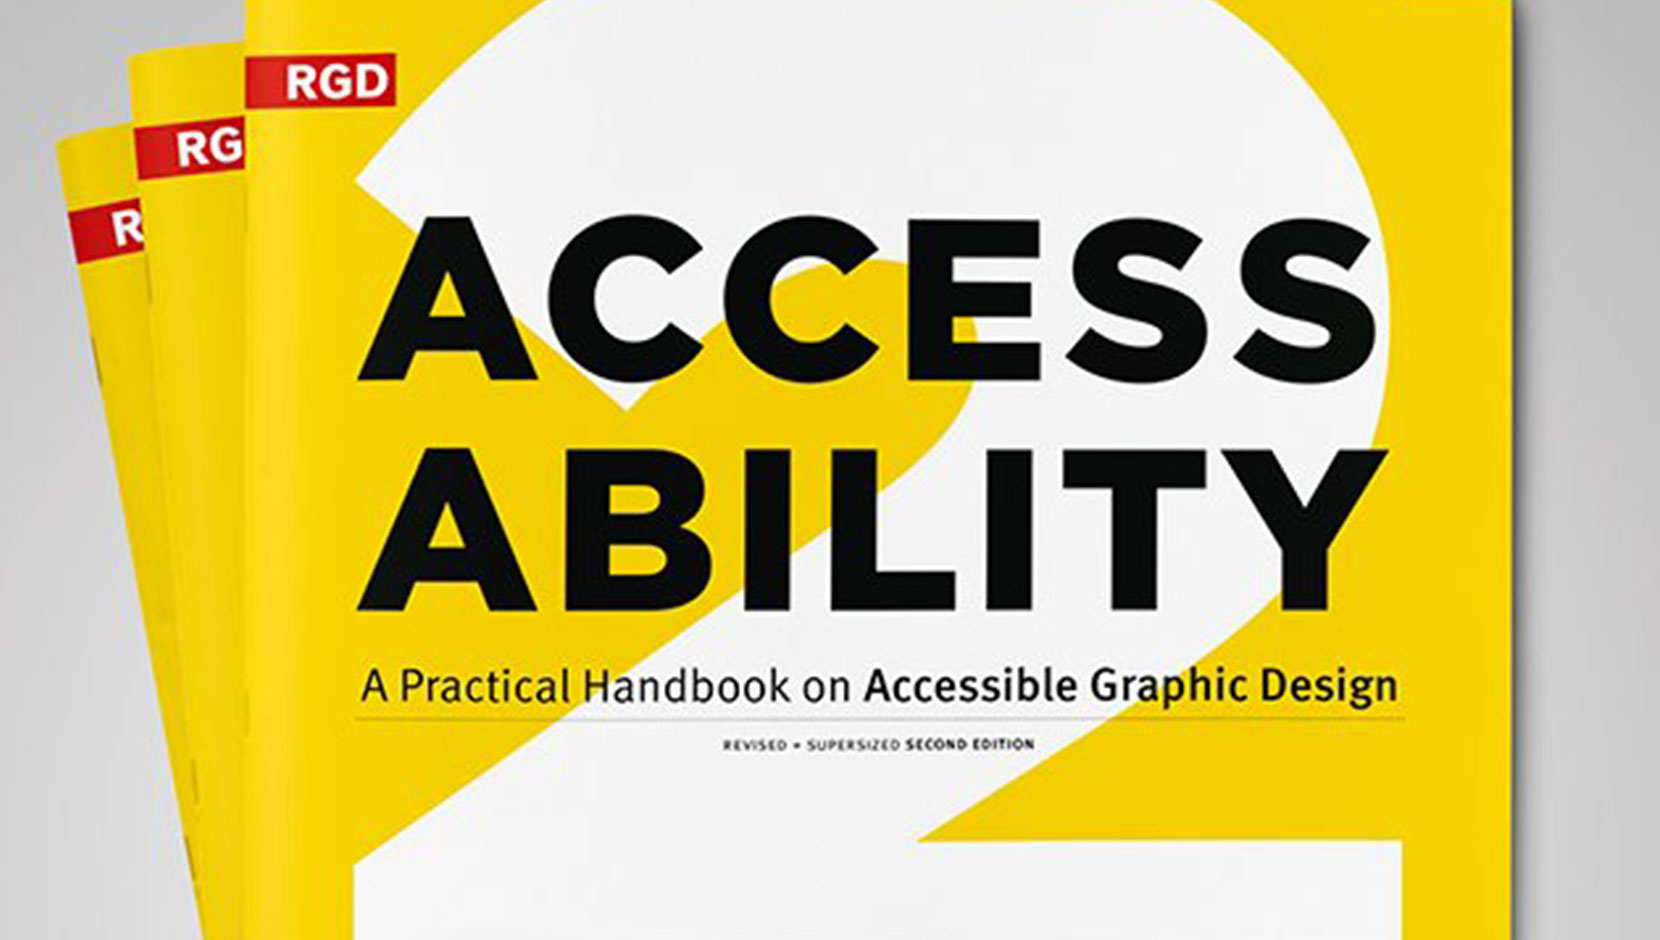 Cover of the Access Ability 2 handbook. It has a bright yellow background with a white two, and text overlaid.